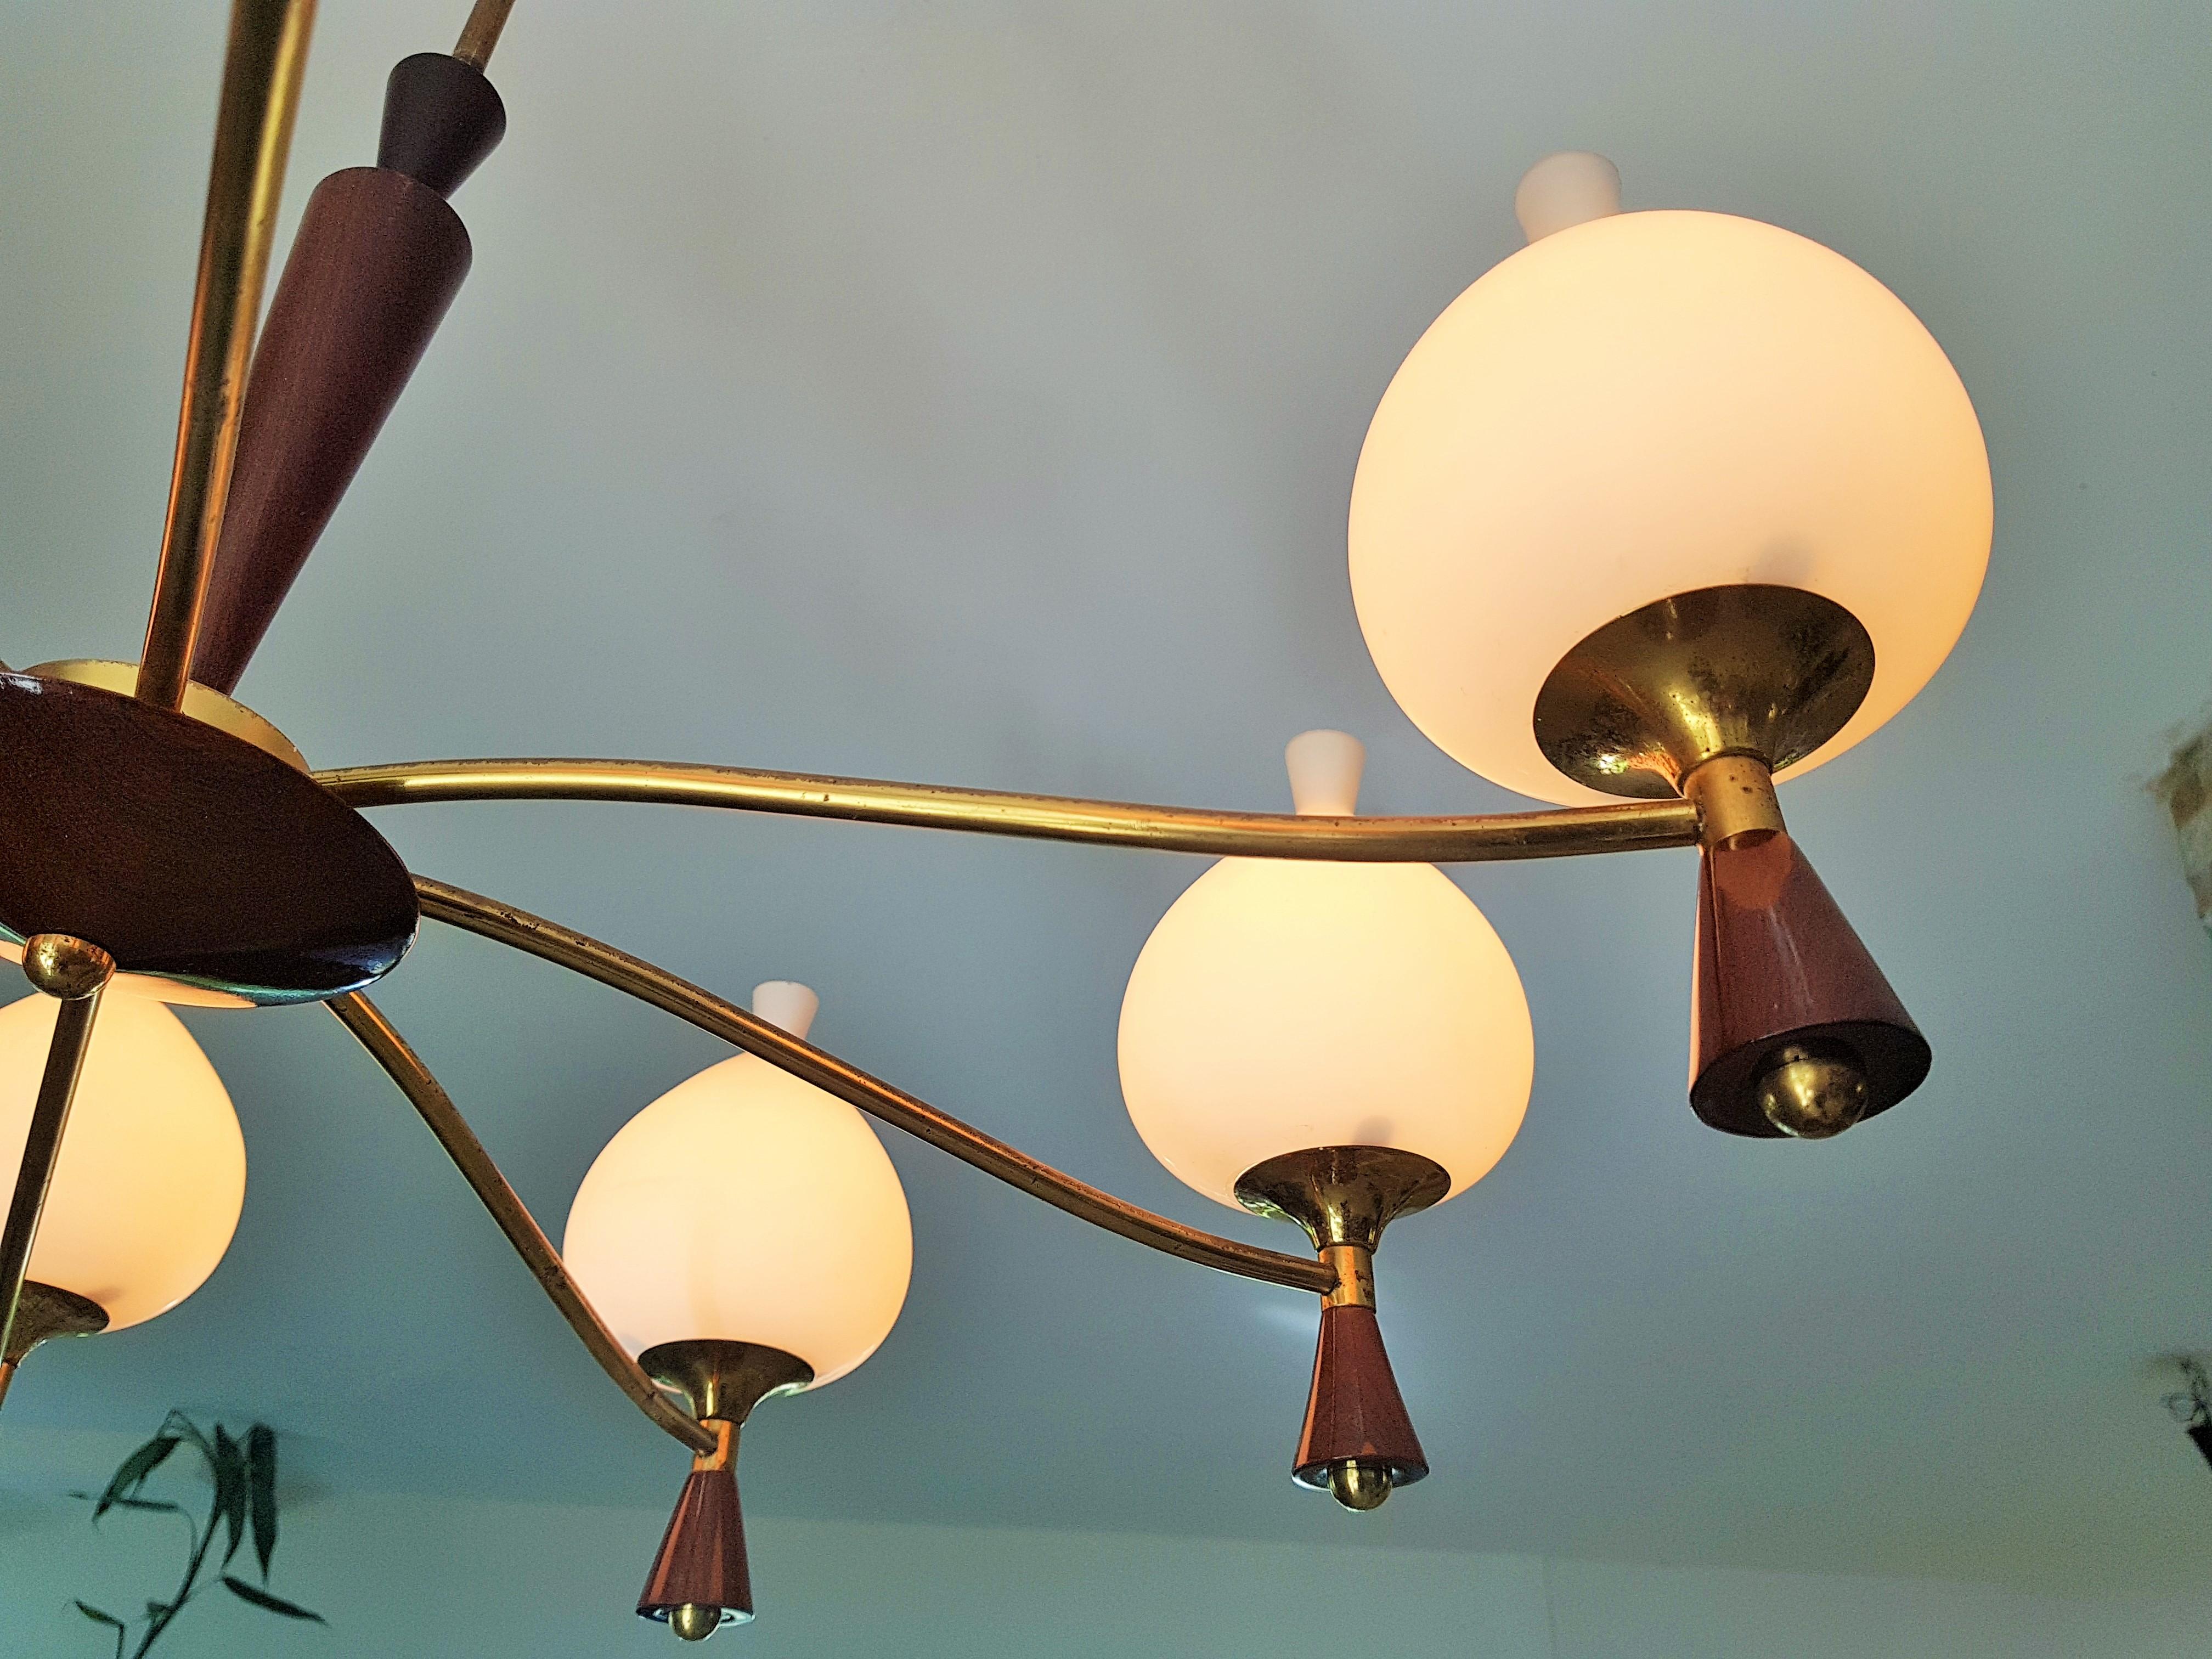 Midcentury Chandelier Style Sciolari, Brass and Wood, Italy, 1950s For Sale 4